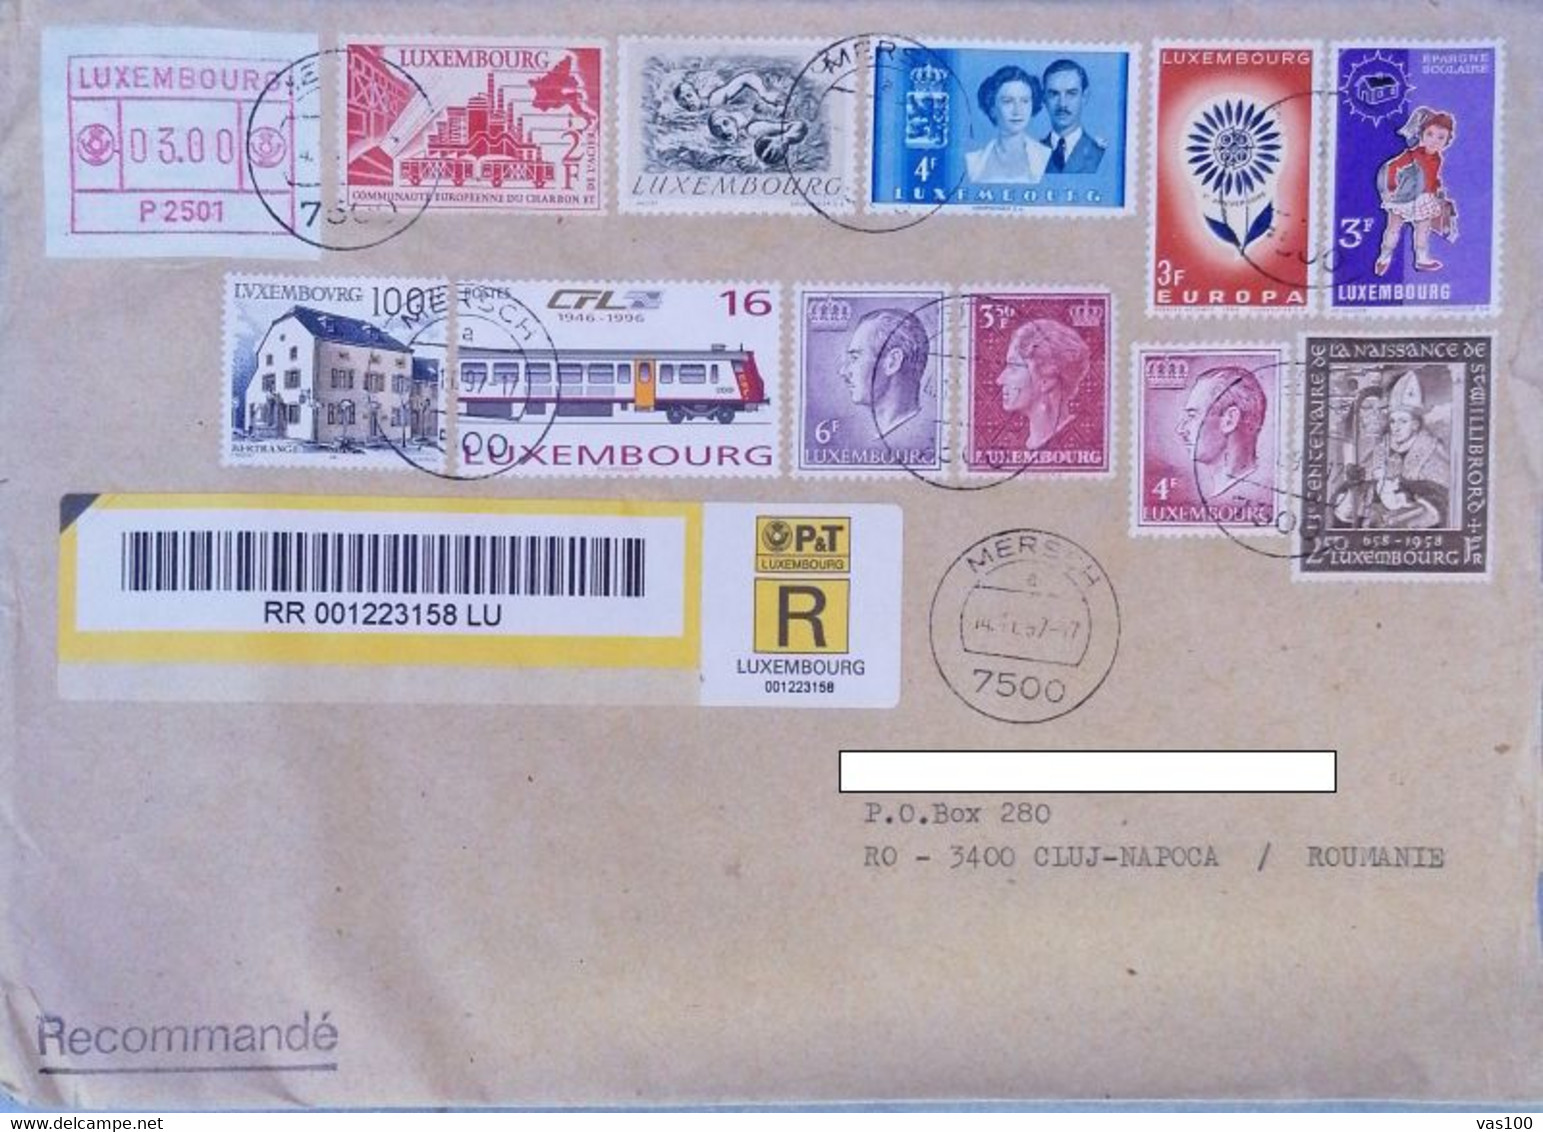 ROYALS, ARCHITECTURE, TRAIN, SWIMMING, EUROPA, STUDENT, STAMPS ON REGISTERED COVER, 1997, LUXEMBOURG - Brieven En Documenten